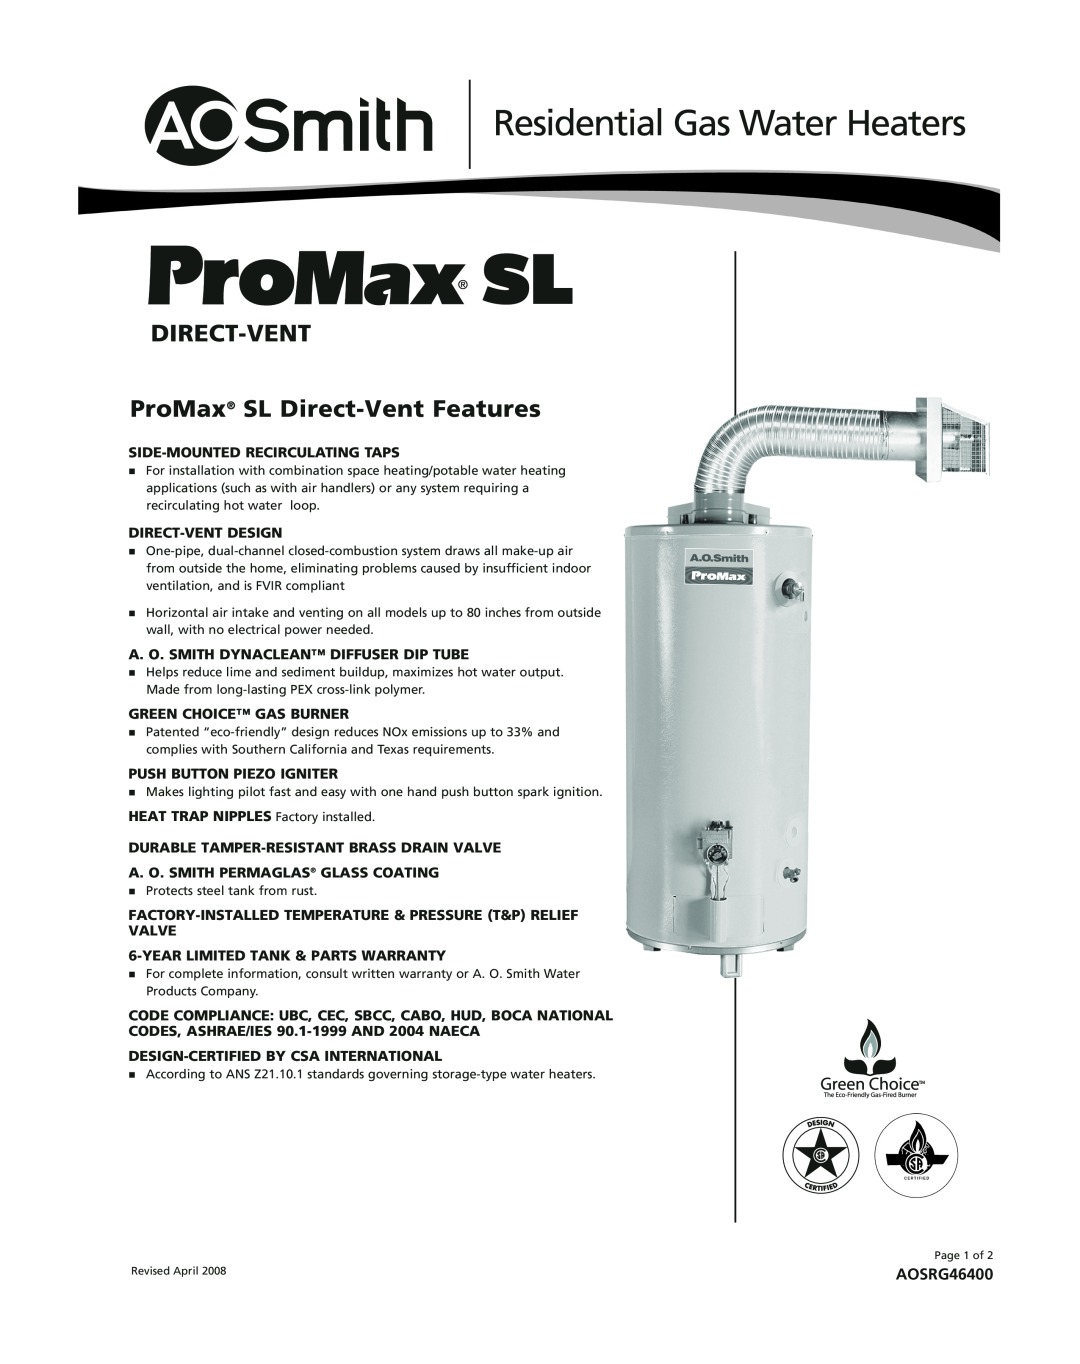 Univex warranty Residential Gas Water Heaters, DIRECT-VENT ProMax SL Direct-VentFeatures, AOSRG46400 